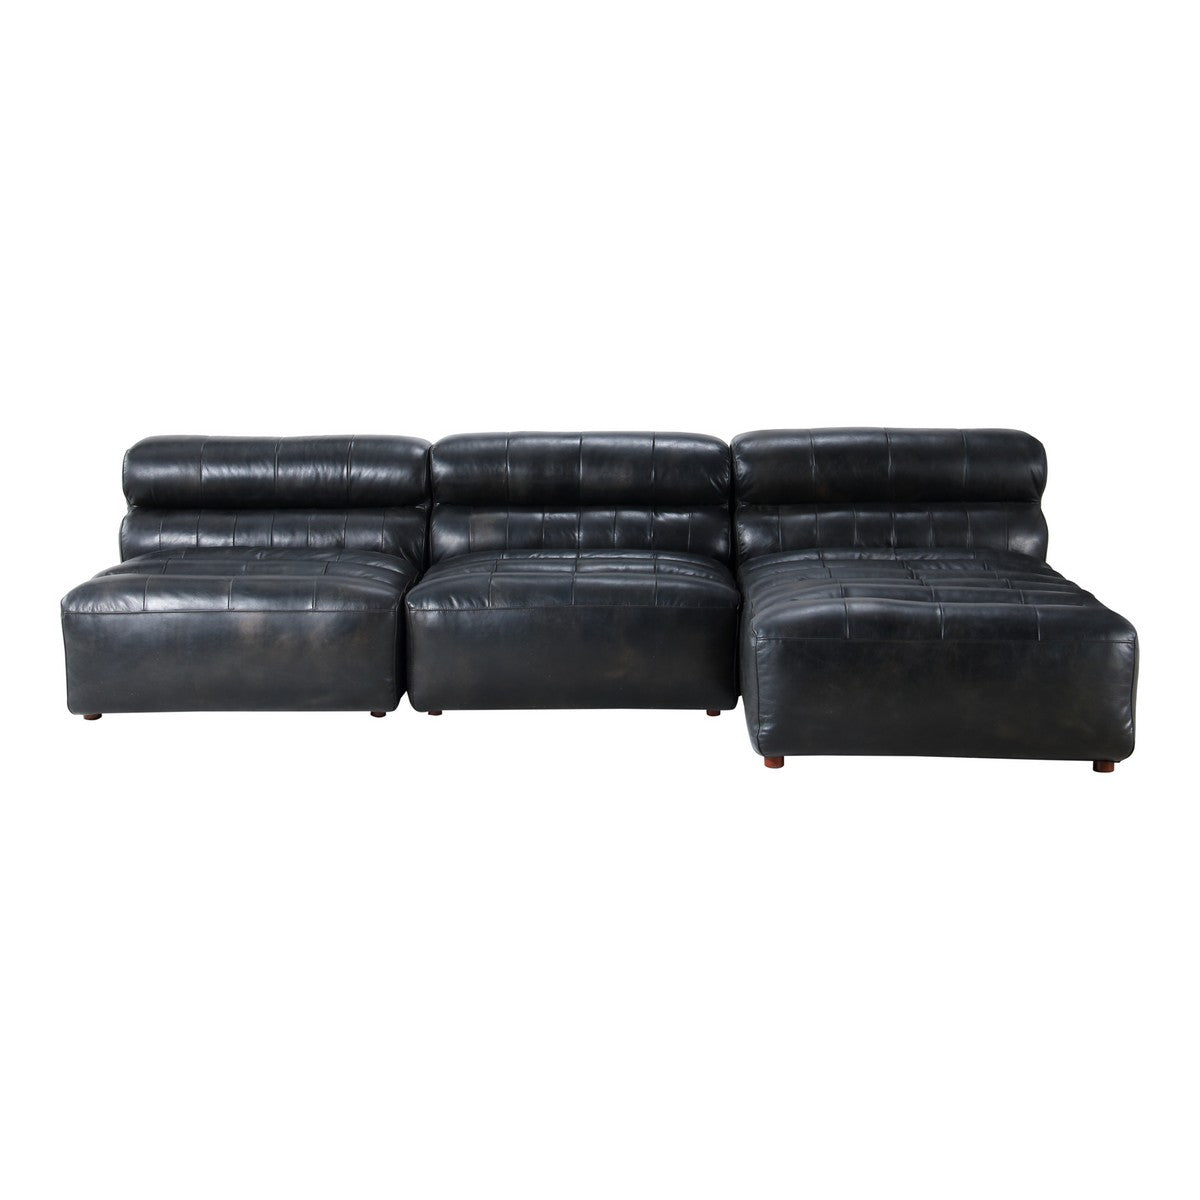 Moe's Home Collection Ramsay Signature Modular Sectional Antique Black - QN-1018-01